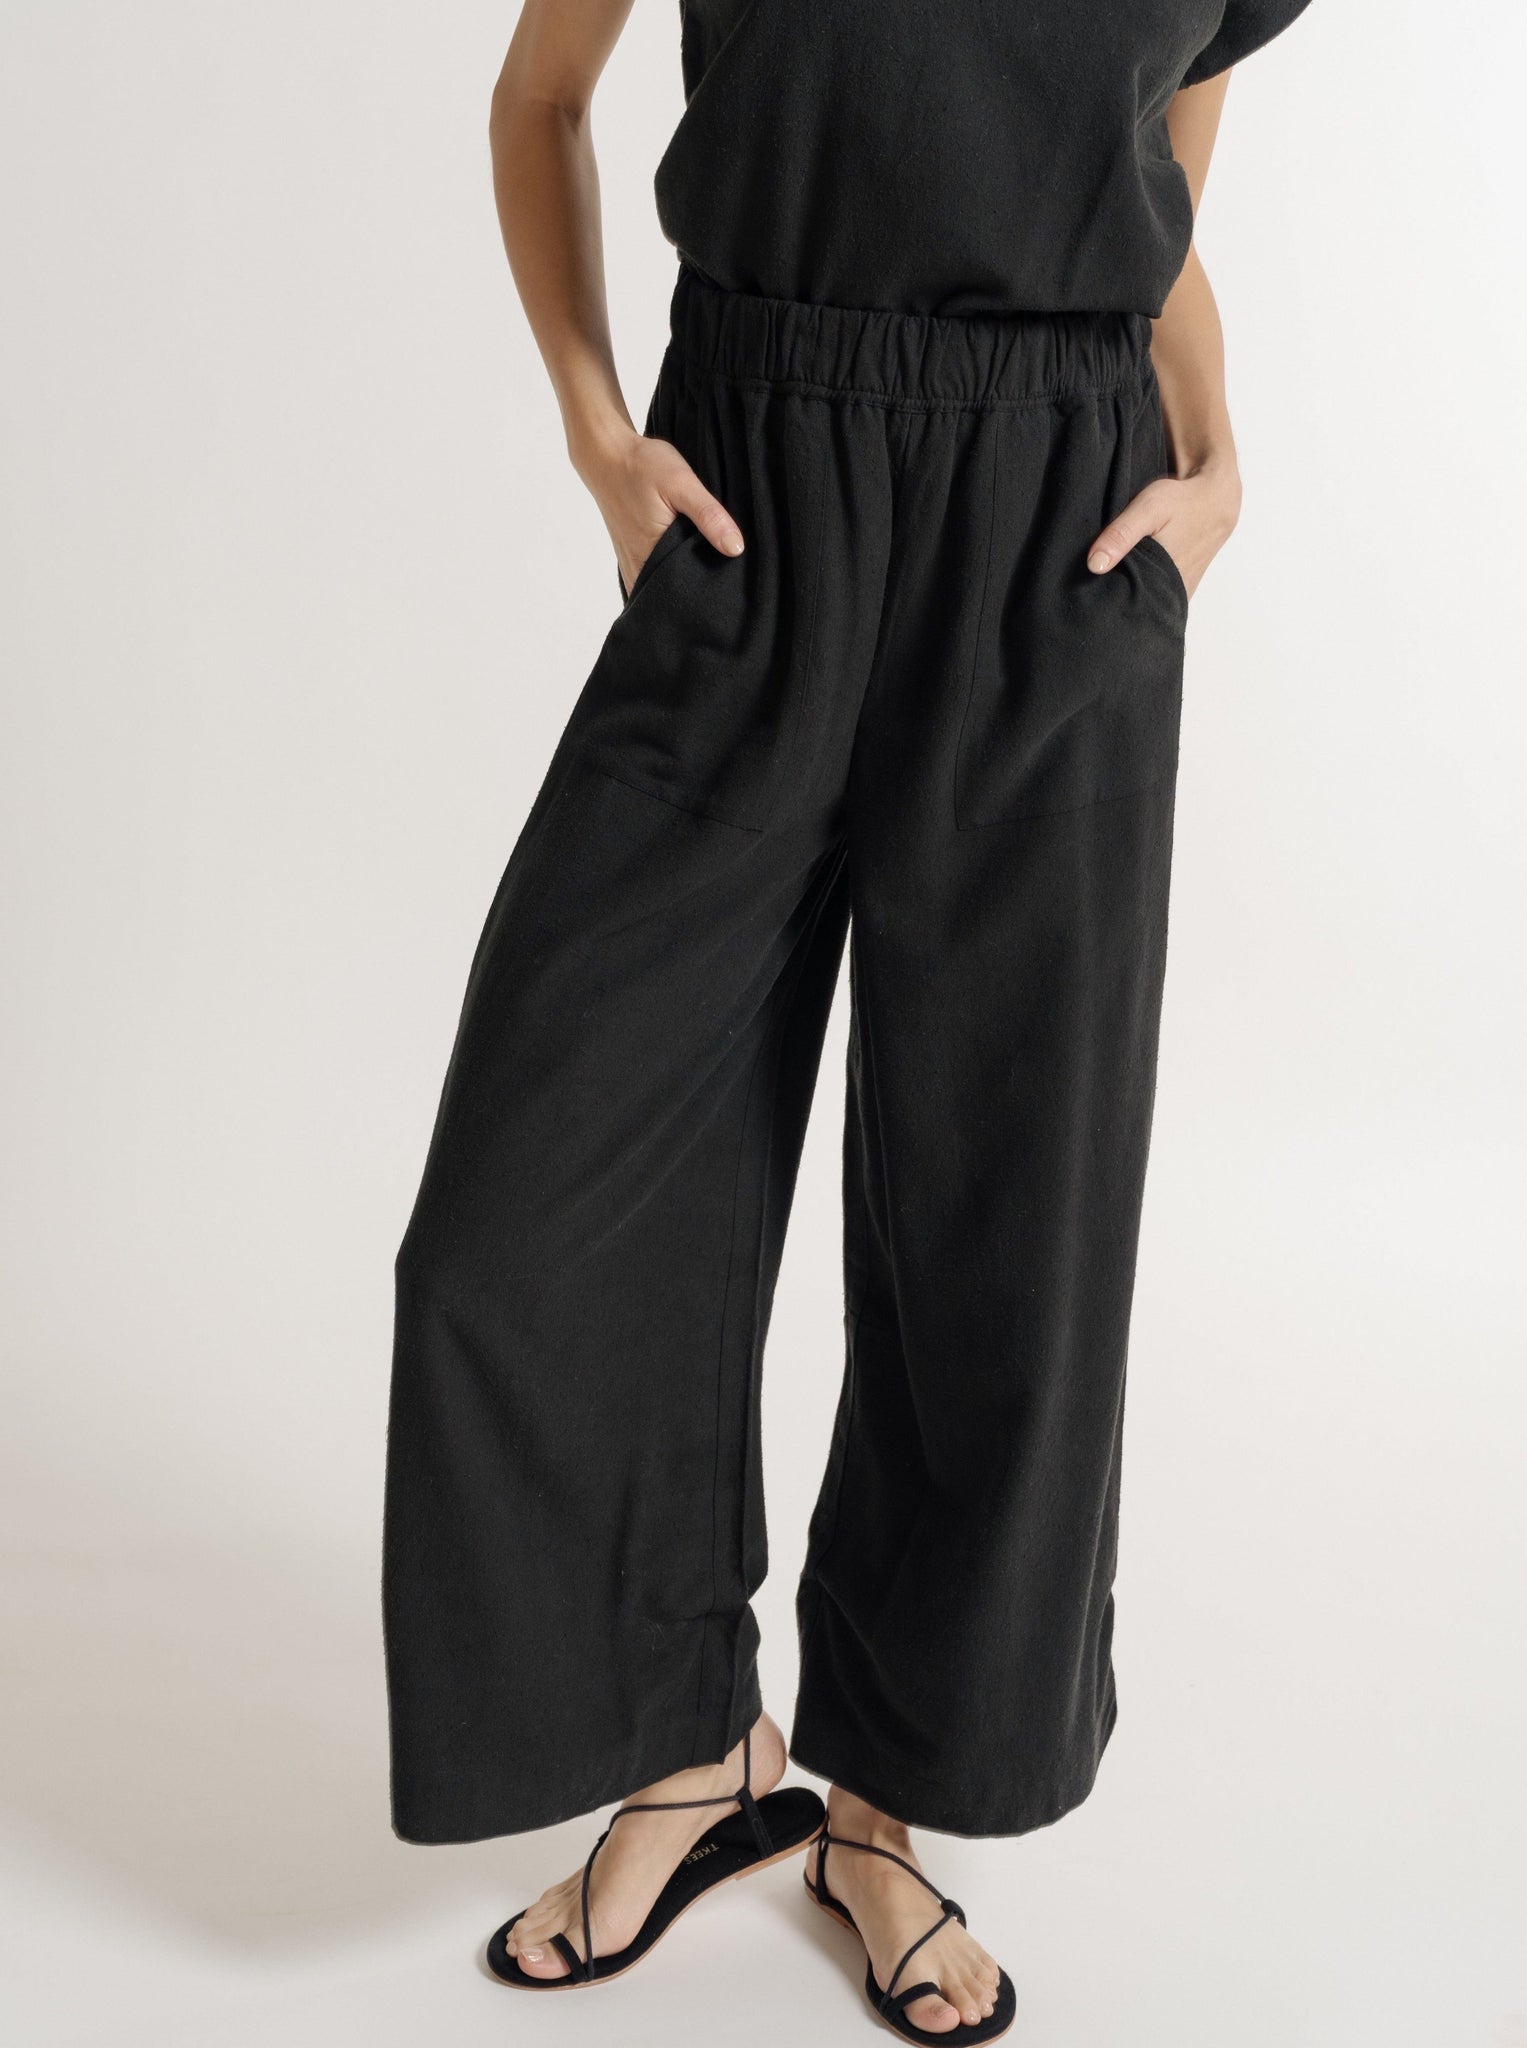 An eco-conscious woman wearing an Everyday Pant - Black Silk Noil - Pre-order jumpsuit.